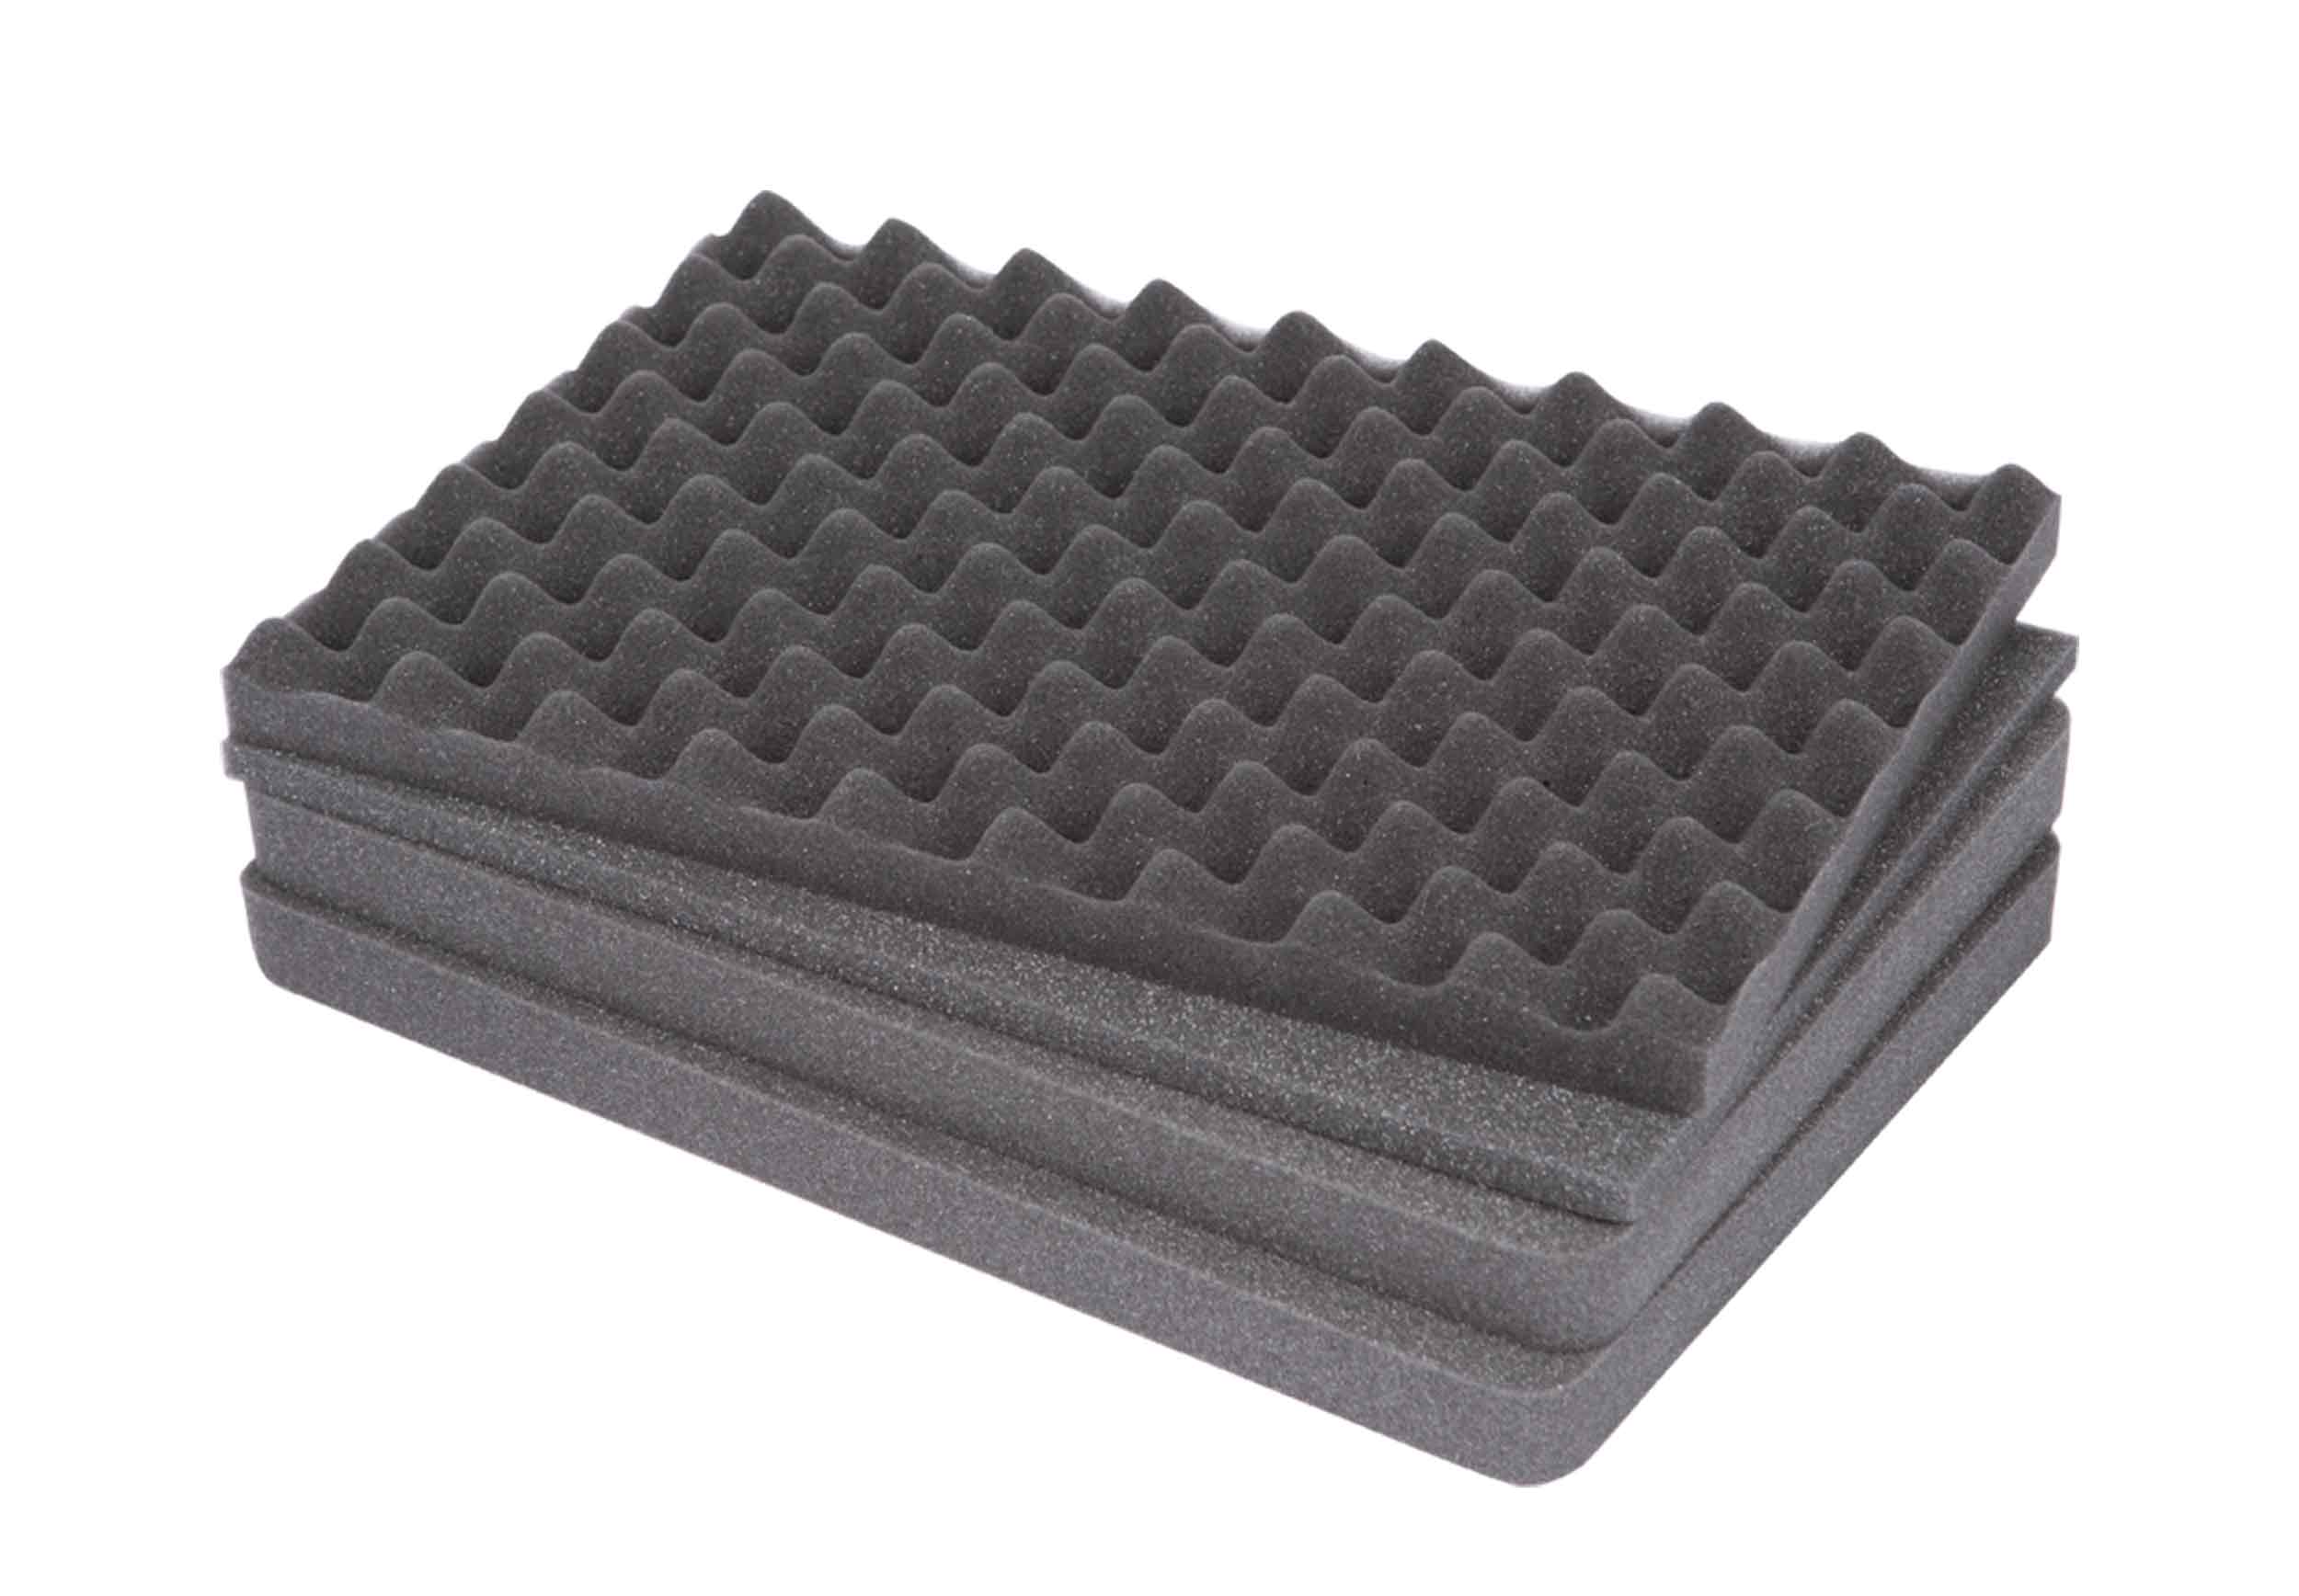 SKB Cases 5FC-1813-5, Replacement Cubed Foam for 3i-1813-5 SKB Cases